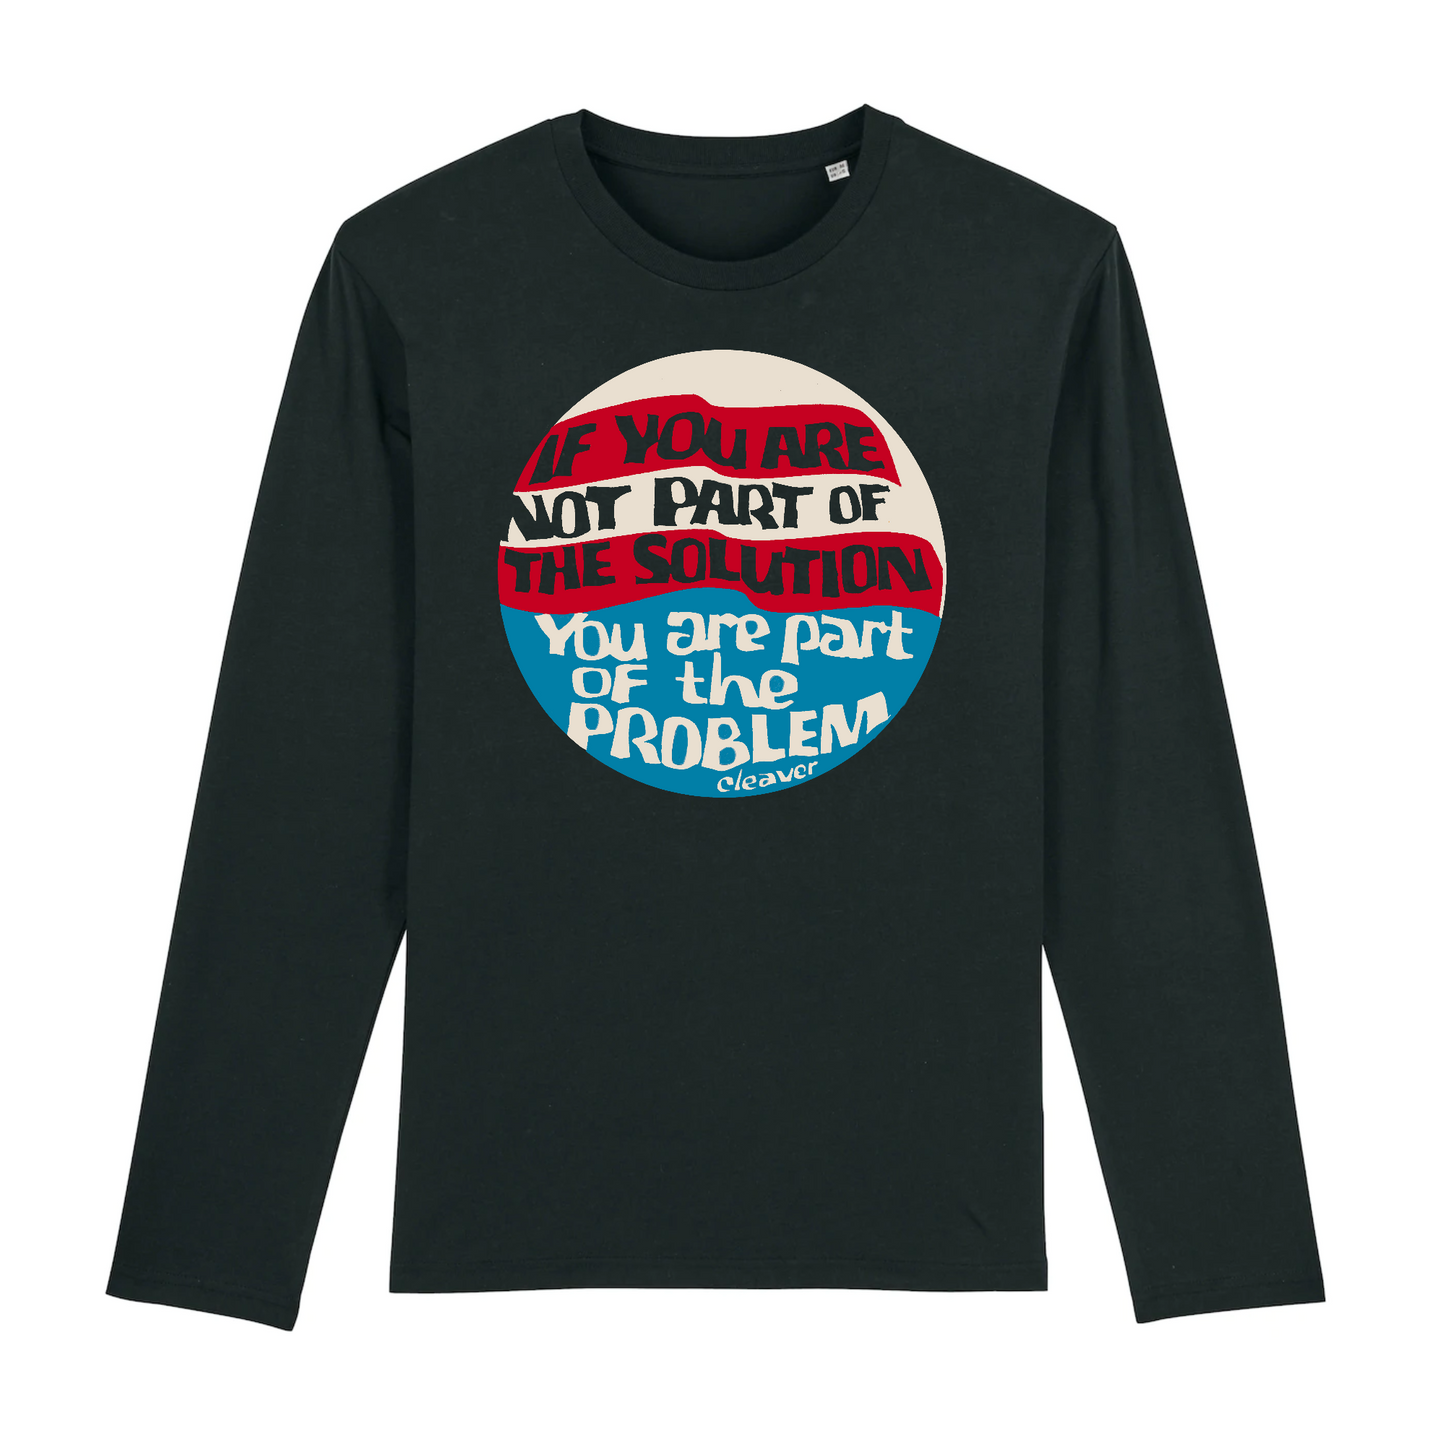 If You Are Not Part of The Solution, You Are Part of The Problem by Eldridge Cleaver by Eldridge Cleaver - Organic Cotton Long-Sleeve T-Shirt